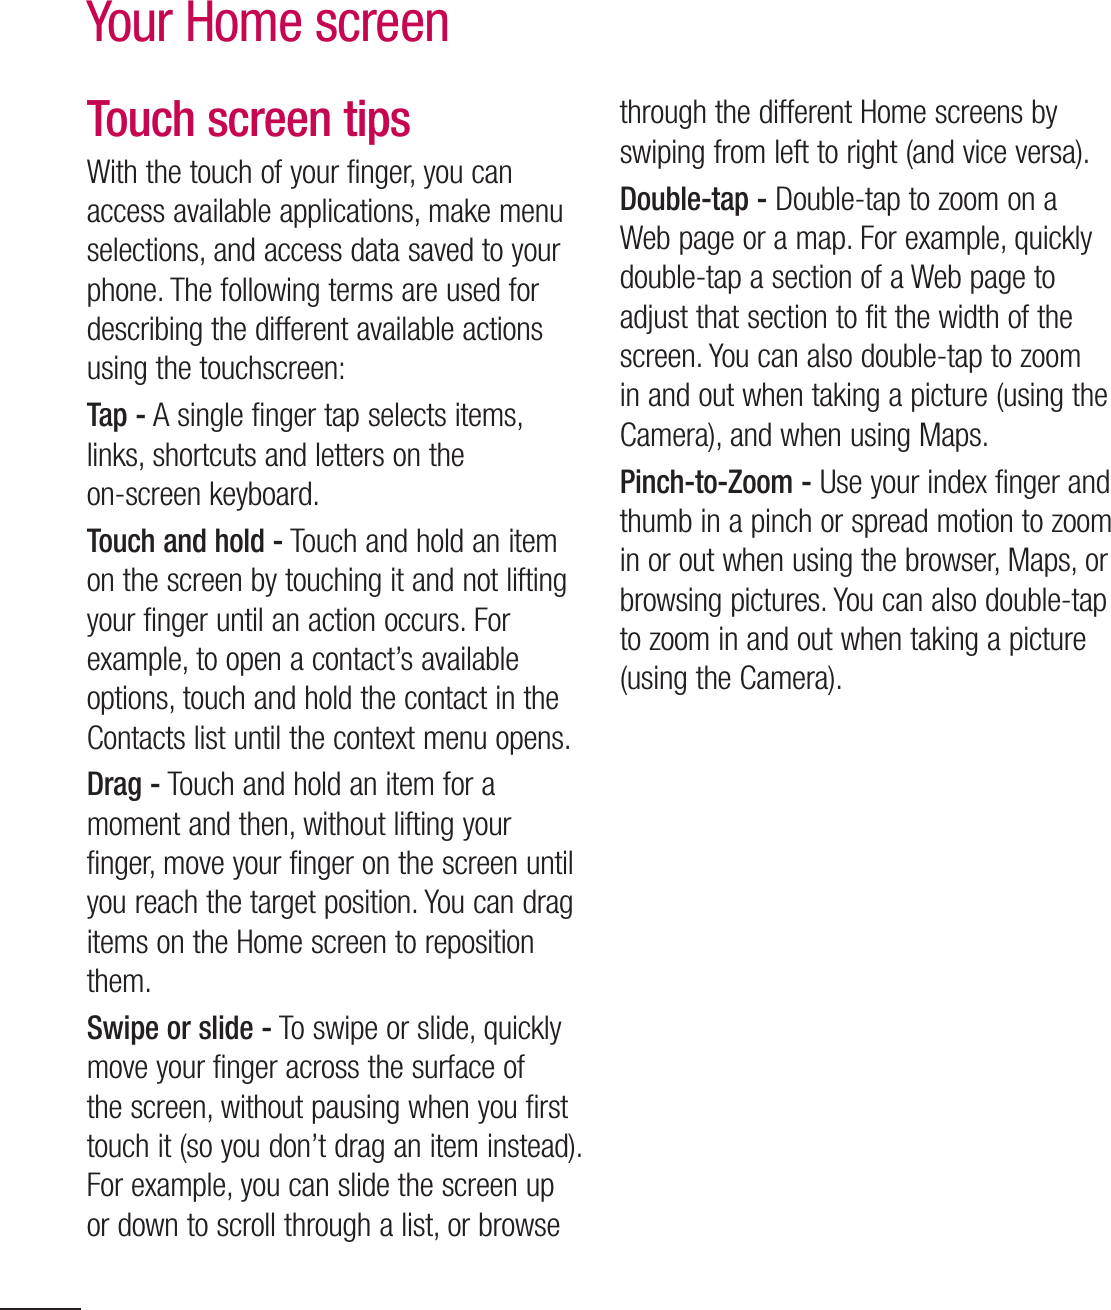 30Your Home screenTouch screen tipsWith the touch of your finger, you can access available applications, make menu selections, and access data saved to your phone. The following terms are used for describing the different available actions using the touchscreen: Tap - A single finger tap selects items, links, shortcuts and letters on the on-screen keyboard.Touch and hold - Touch and hold an item on the screen by touching it and not lifting your finger until an action occurs. For example, to open a contact’s available options, touch and hold the contact in the Contacts list until the context menu opens.Drag - Touch and hold an item for a moment and then, without lifting your finger, move your finger on the screen until you reach the target position. You can drag items on the Home screen to reposition them.Swipe or slide - To swipe or slide, quickly move your finger across the surface of the screen, without pausing when you first touch it (so you don’t drag an item instead). For example, you can slide the screen up or down to scroll through a list, or browse through the different Home screens by swiping from left to right (and vice versa).Double-tap - Double-tap to zoom on a Web page or a map. For example, quickly double-tap a section of a Web page to adjust that section to fit the width of the screen. You can also double-tap to zoom in and out when taking a picture (using the Camera), and when using Maps.Pinch-to-Zoom - Use your index finger and thumb in a pinch or spread motion to zoom in or out when using the browser, Maps, or browsing pictures. You can also double-tap to zoom in and out when taking a picture (using the Camera).Pull in (Zoom Out)Push (Zoom In)